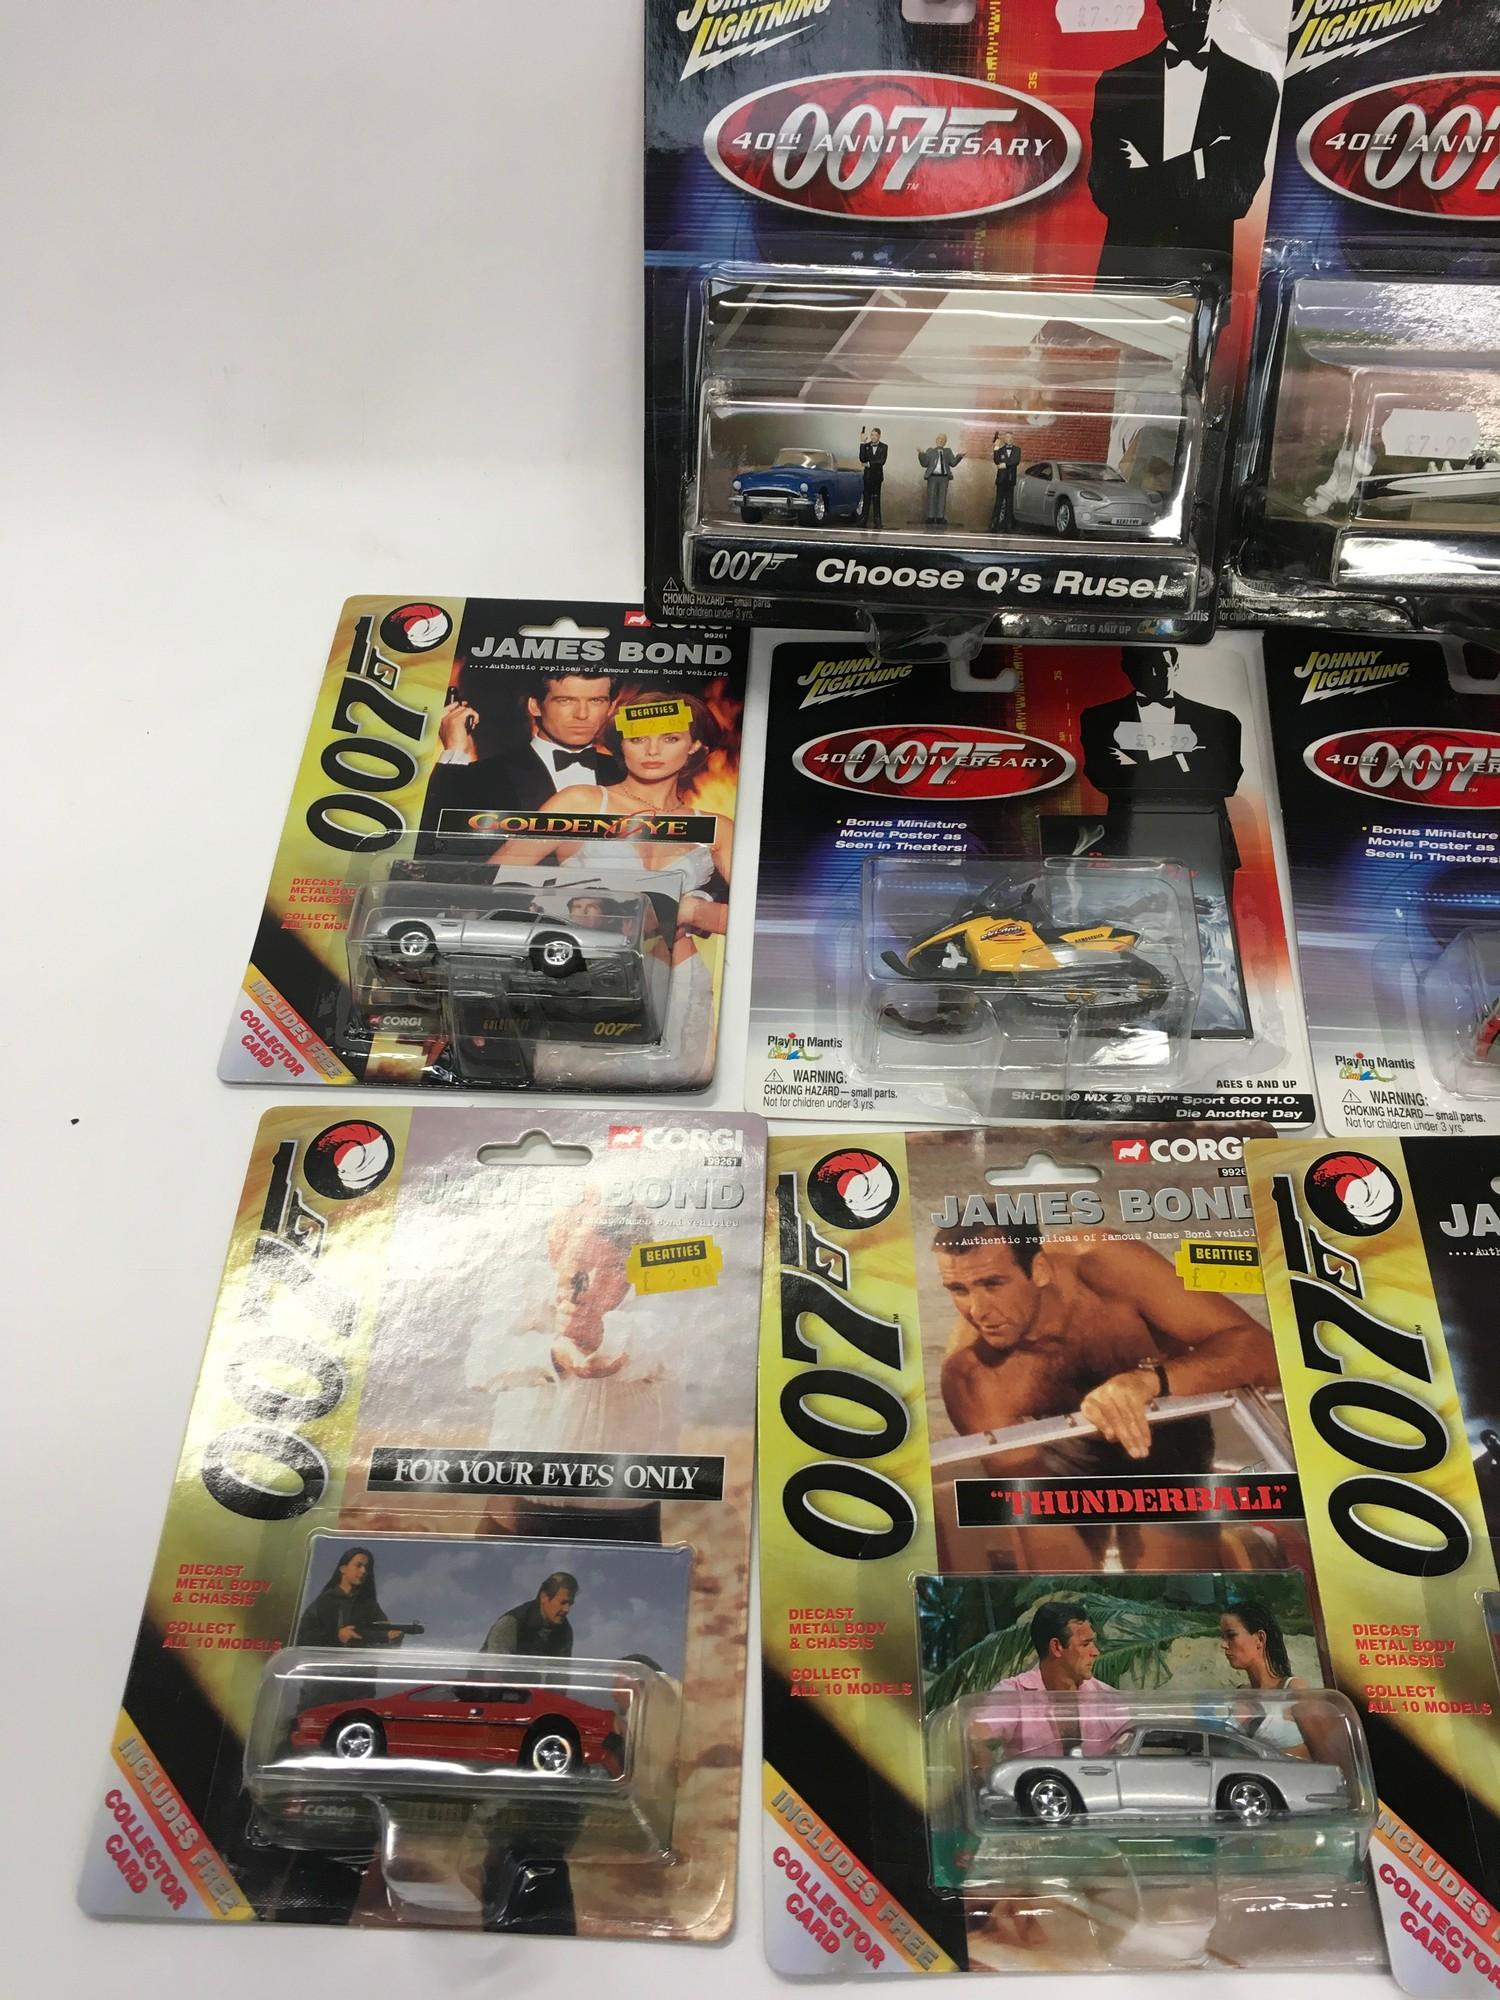 Collection of James Bond related diecast model vehicles in bubble packs by Corgi and Johnny - Image 2 of 3